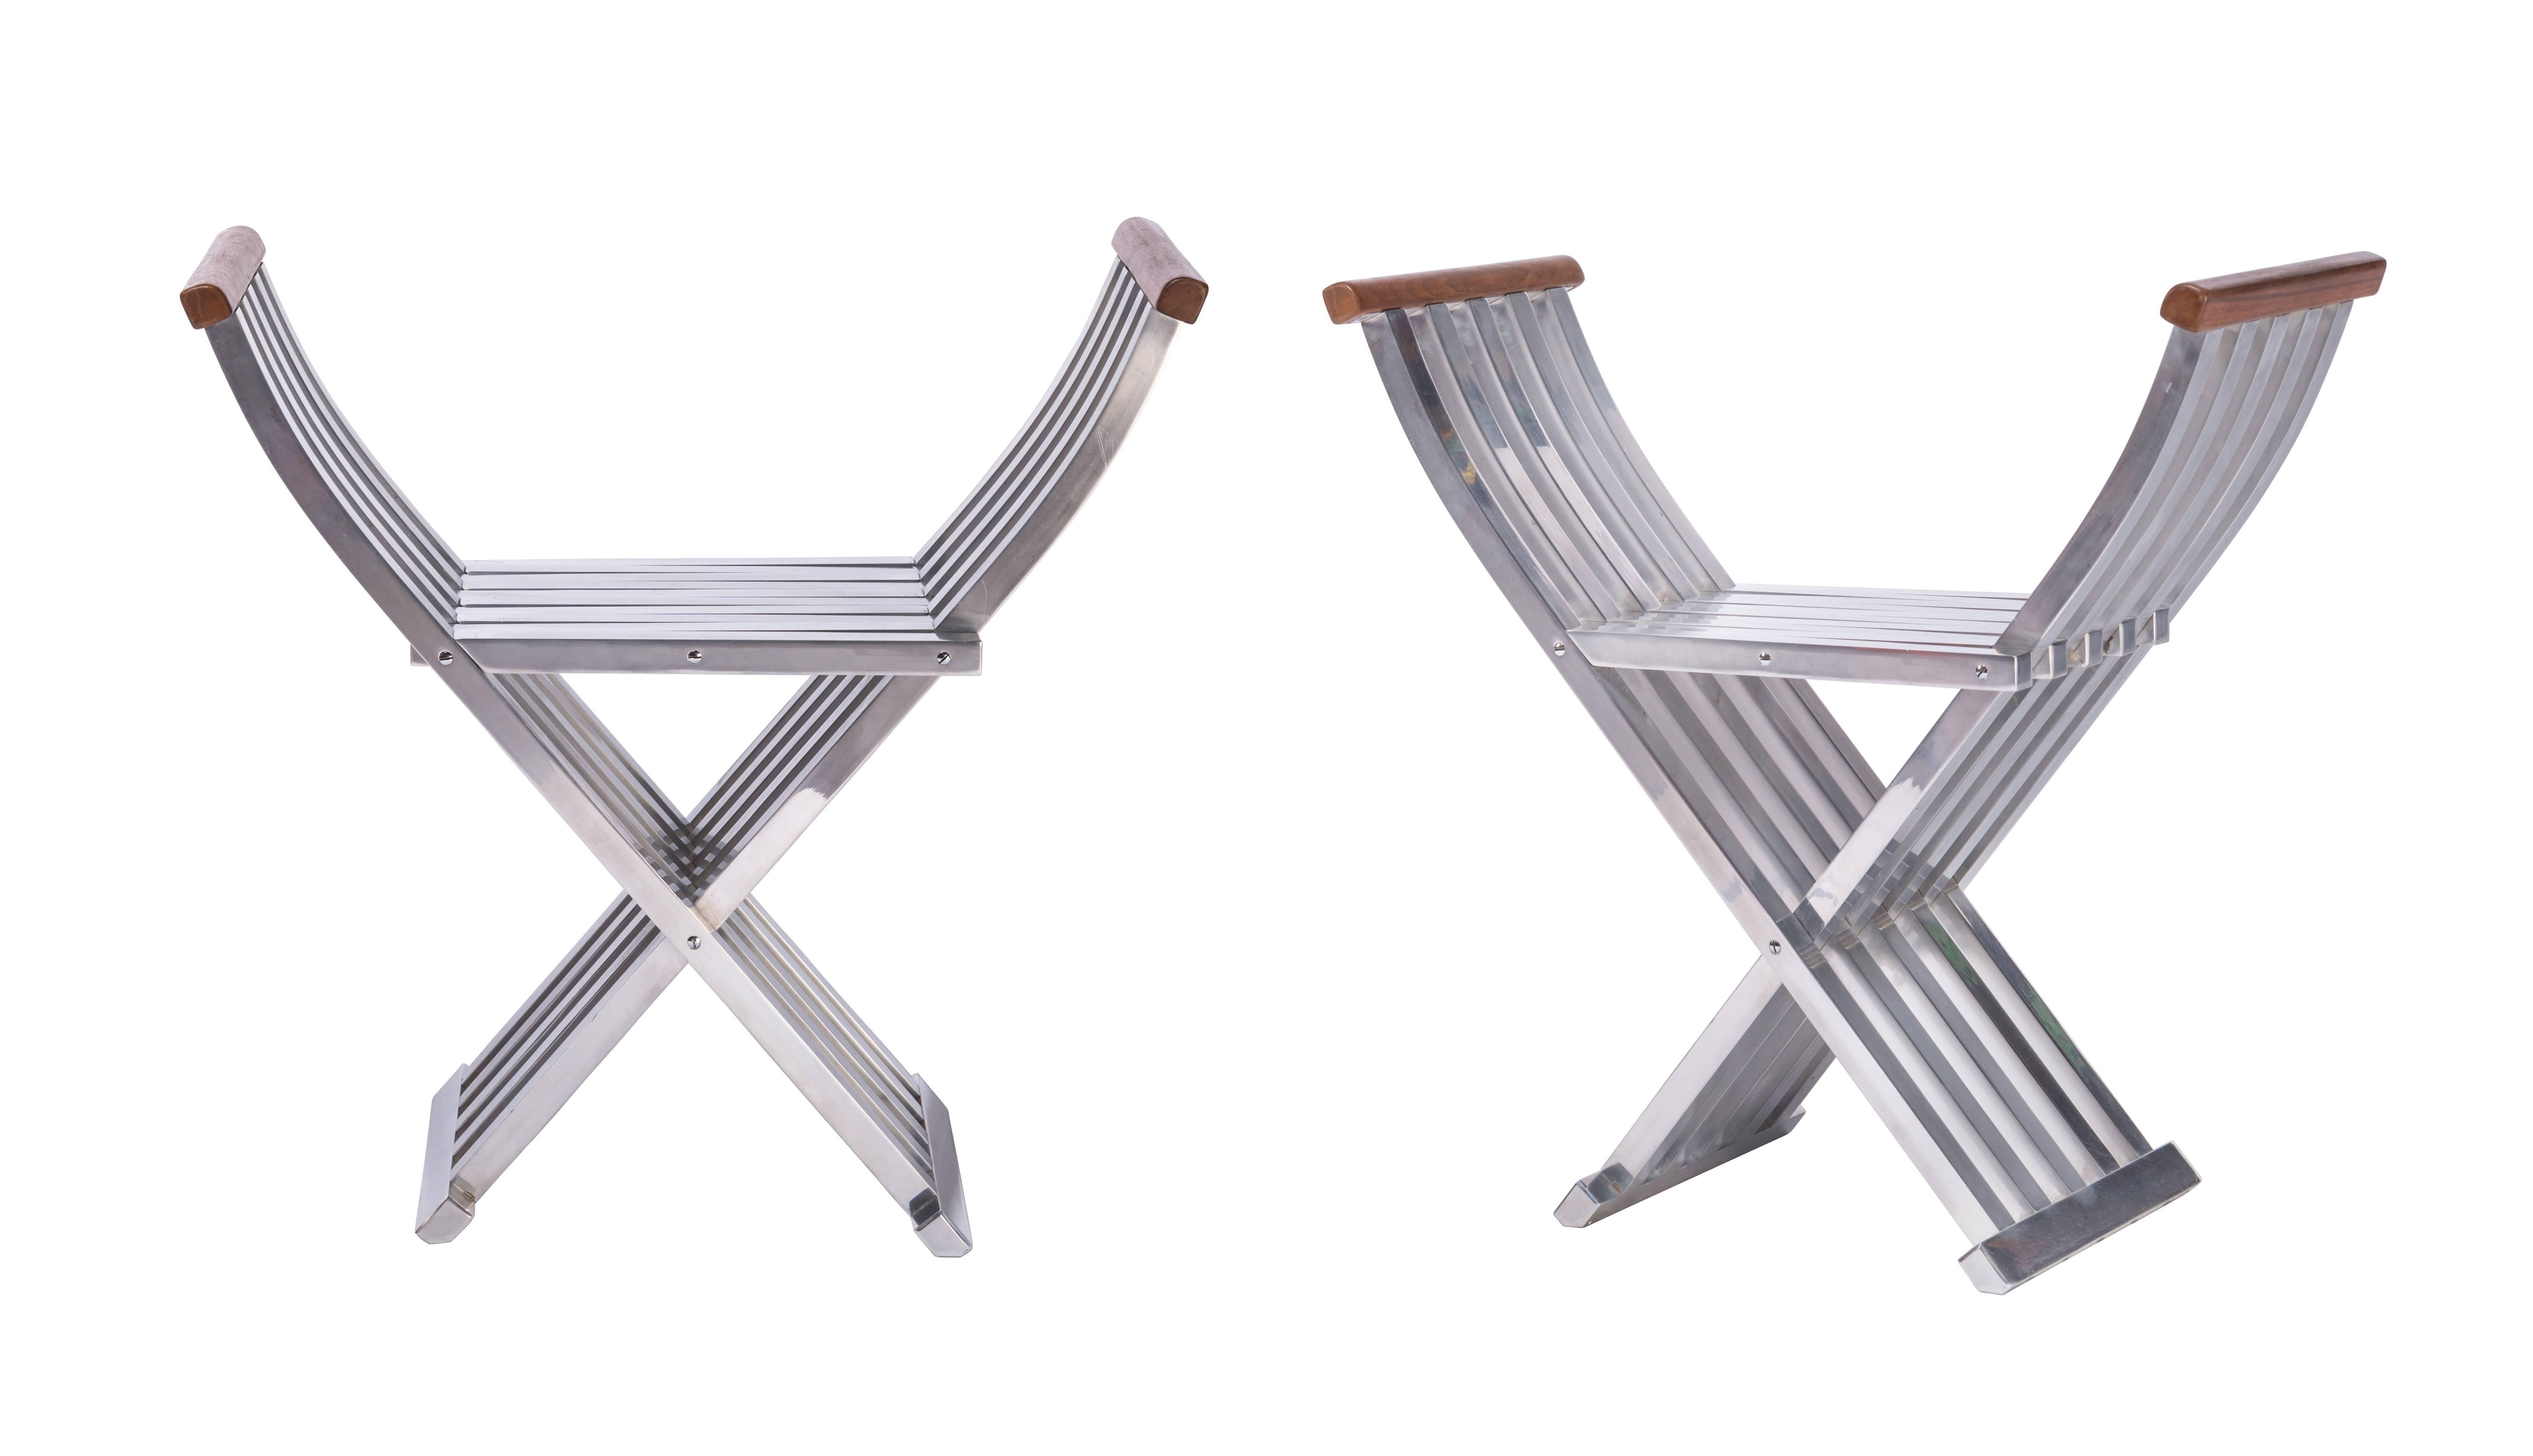 A beautiful pair of extremely well engineered and designed folding benches from John Vesey. Made from brushed and lacquered aluminum with walnut handles. Bench seats with some age appropriate minor scratching.